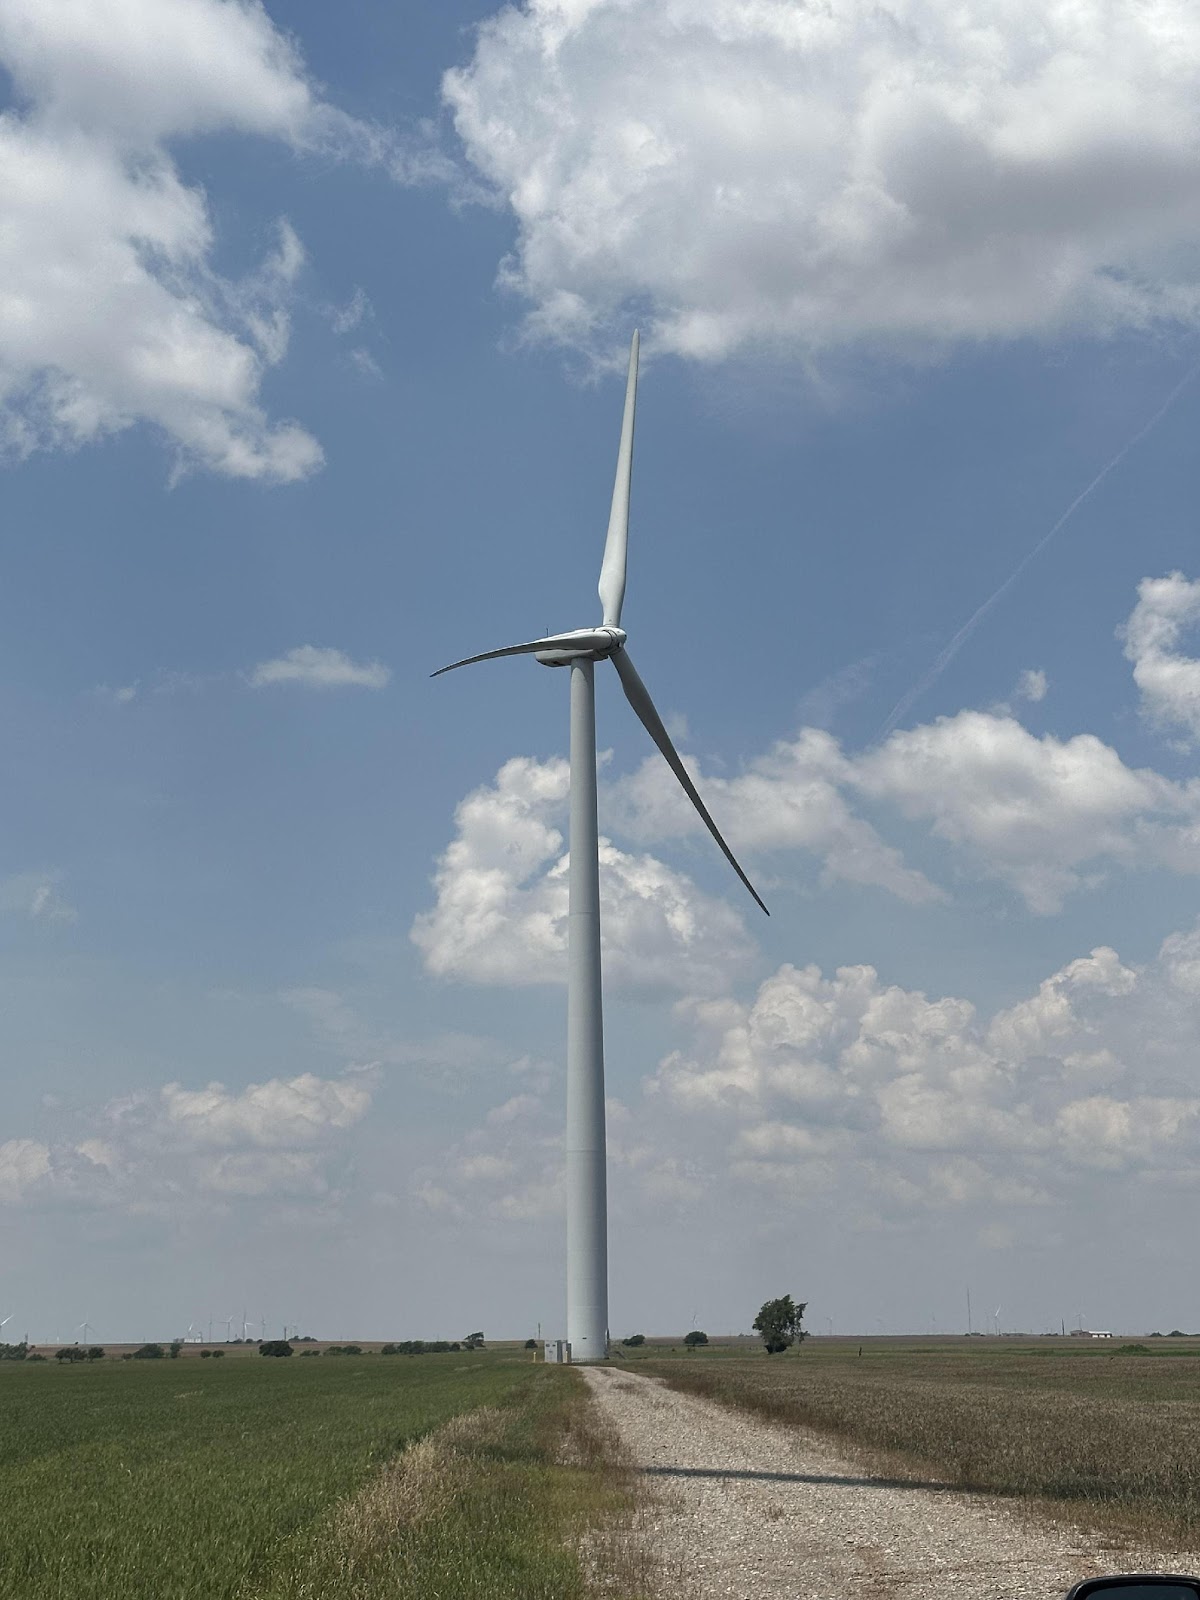 A wind turbine in a field

Description automatically generated with low confidence